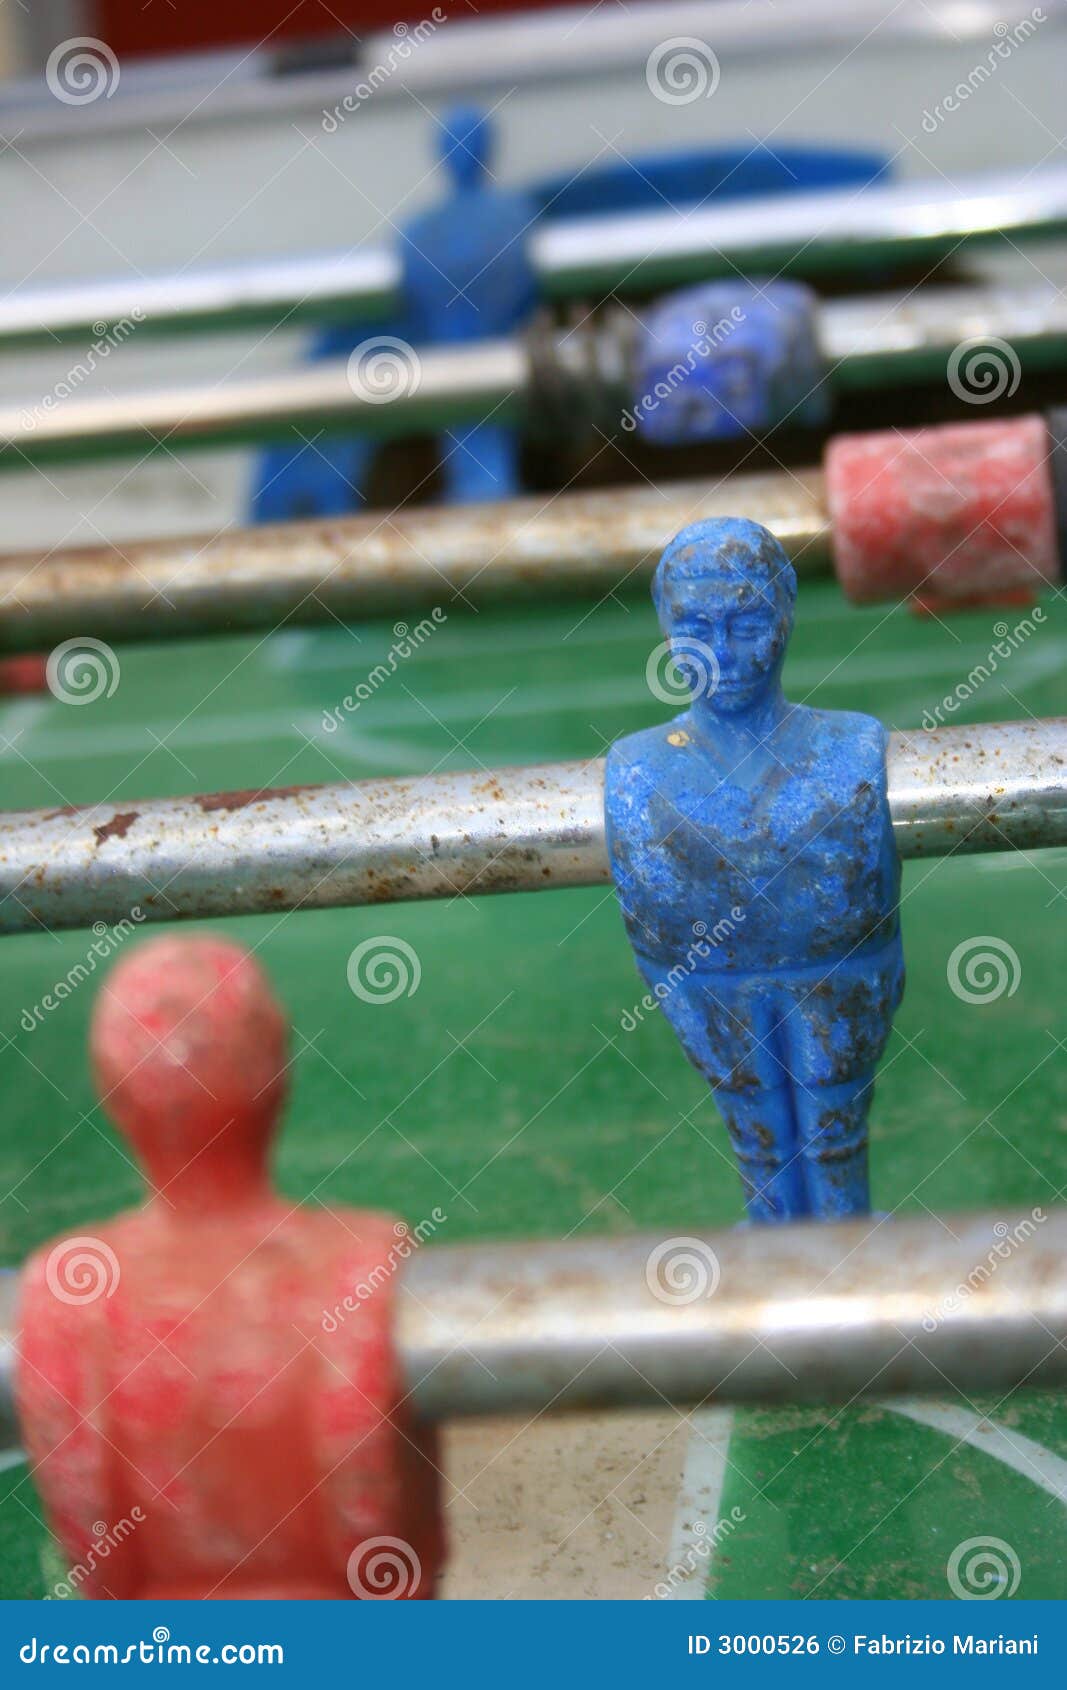 red vs blue in table football